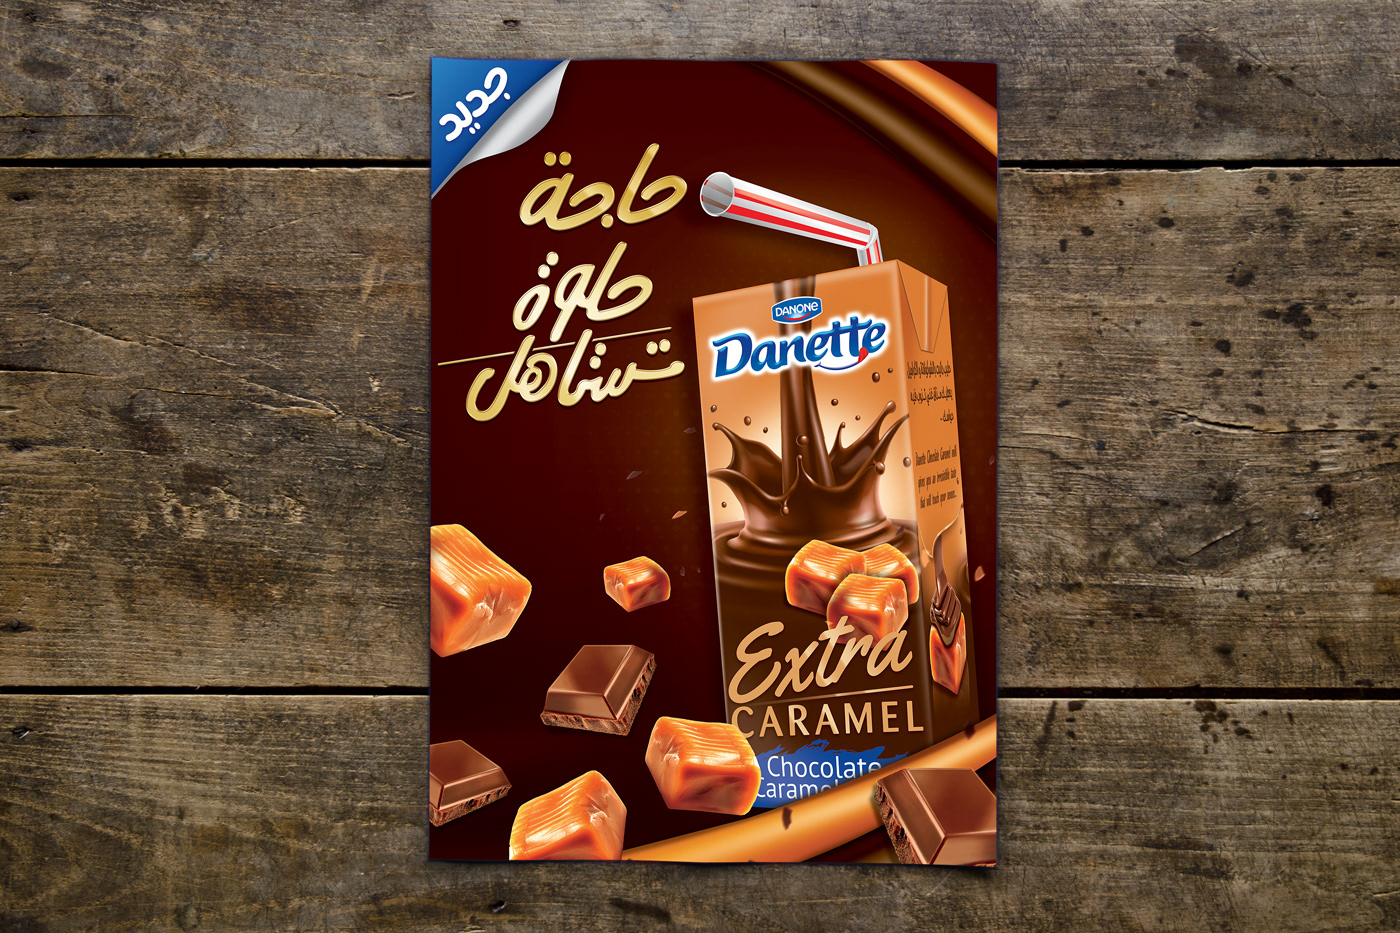 Danette Extra Caramel Advertising  launching campaign posm Drink Floor Display Floor Stand